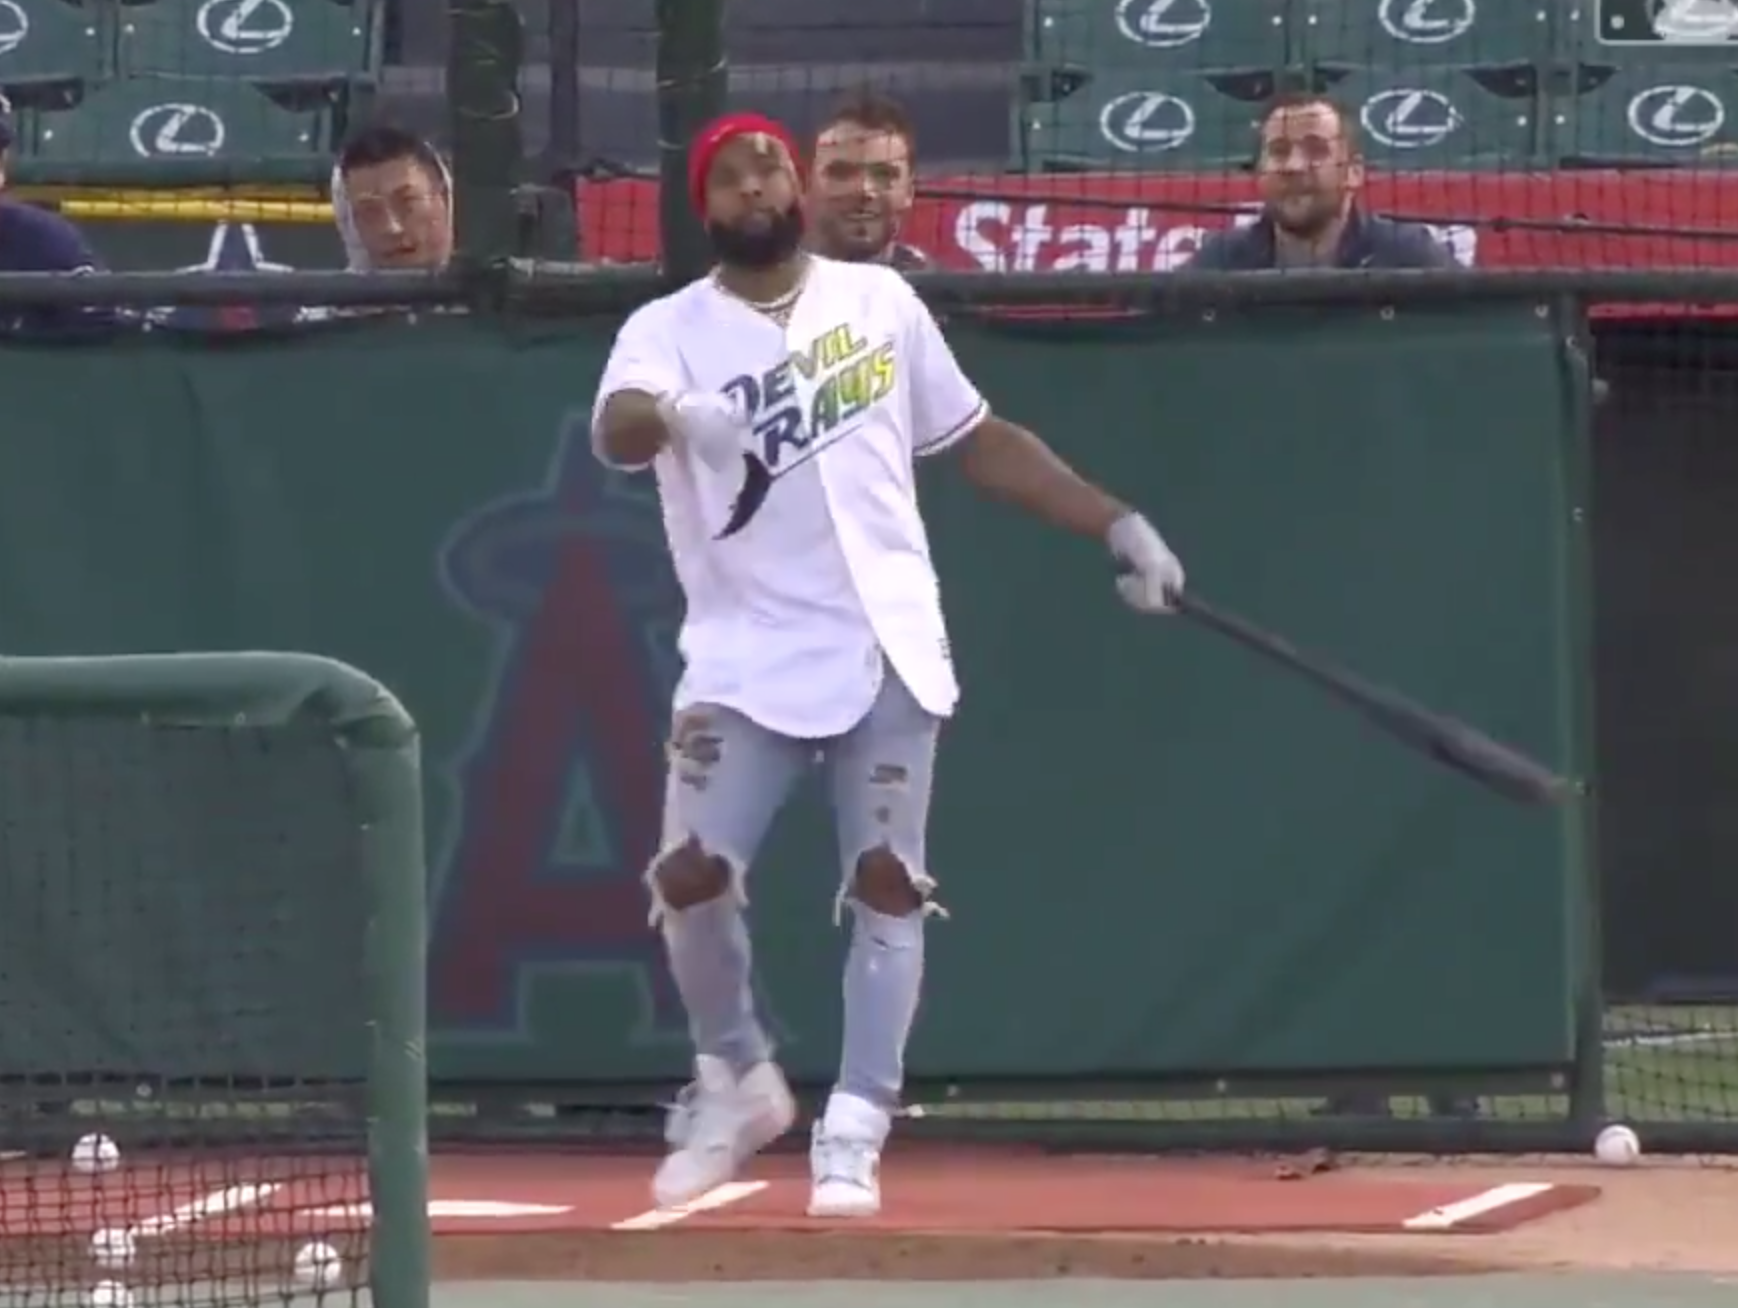 Odell Beckham Jr. takes batting practice with the New York Yankees